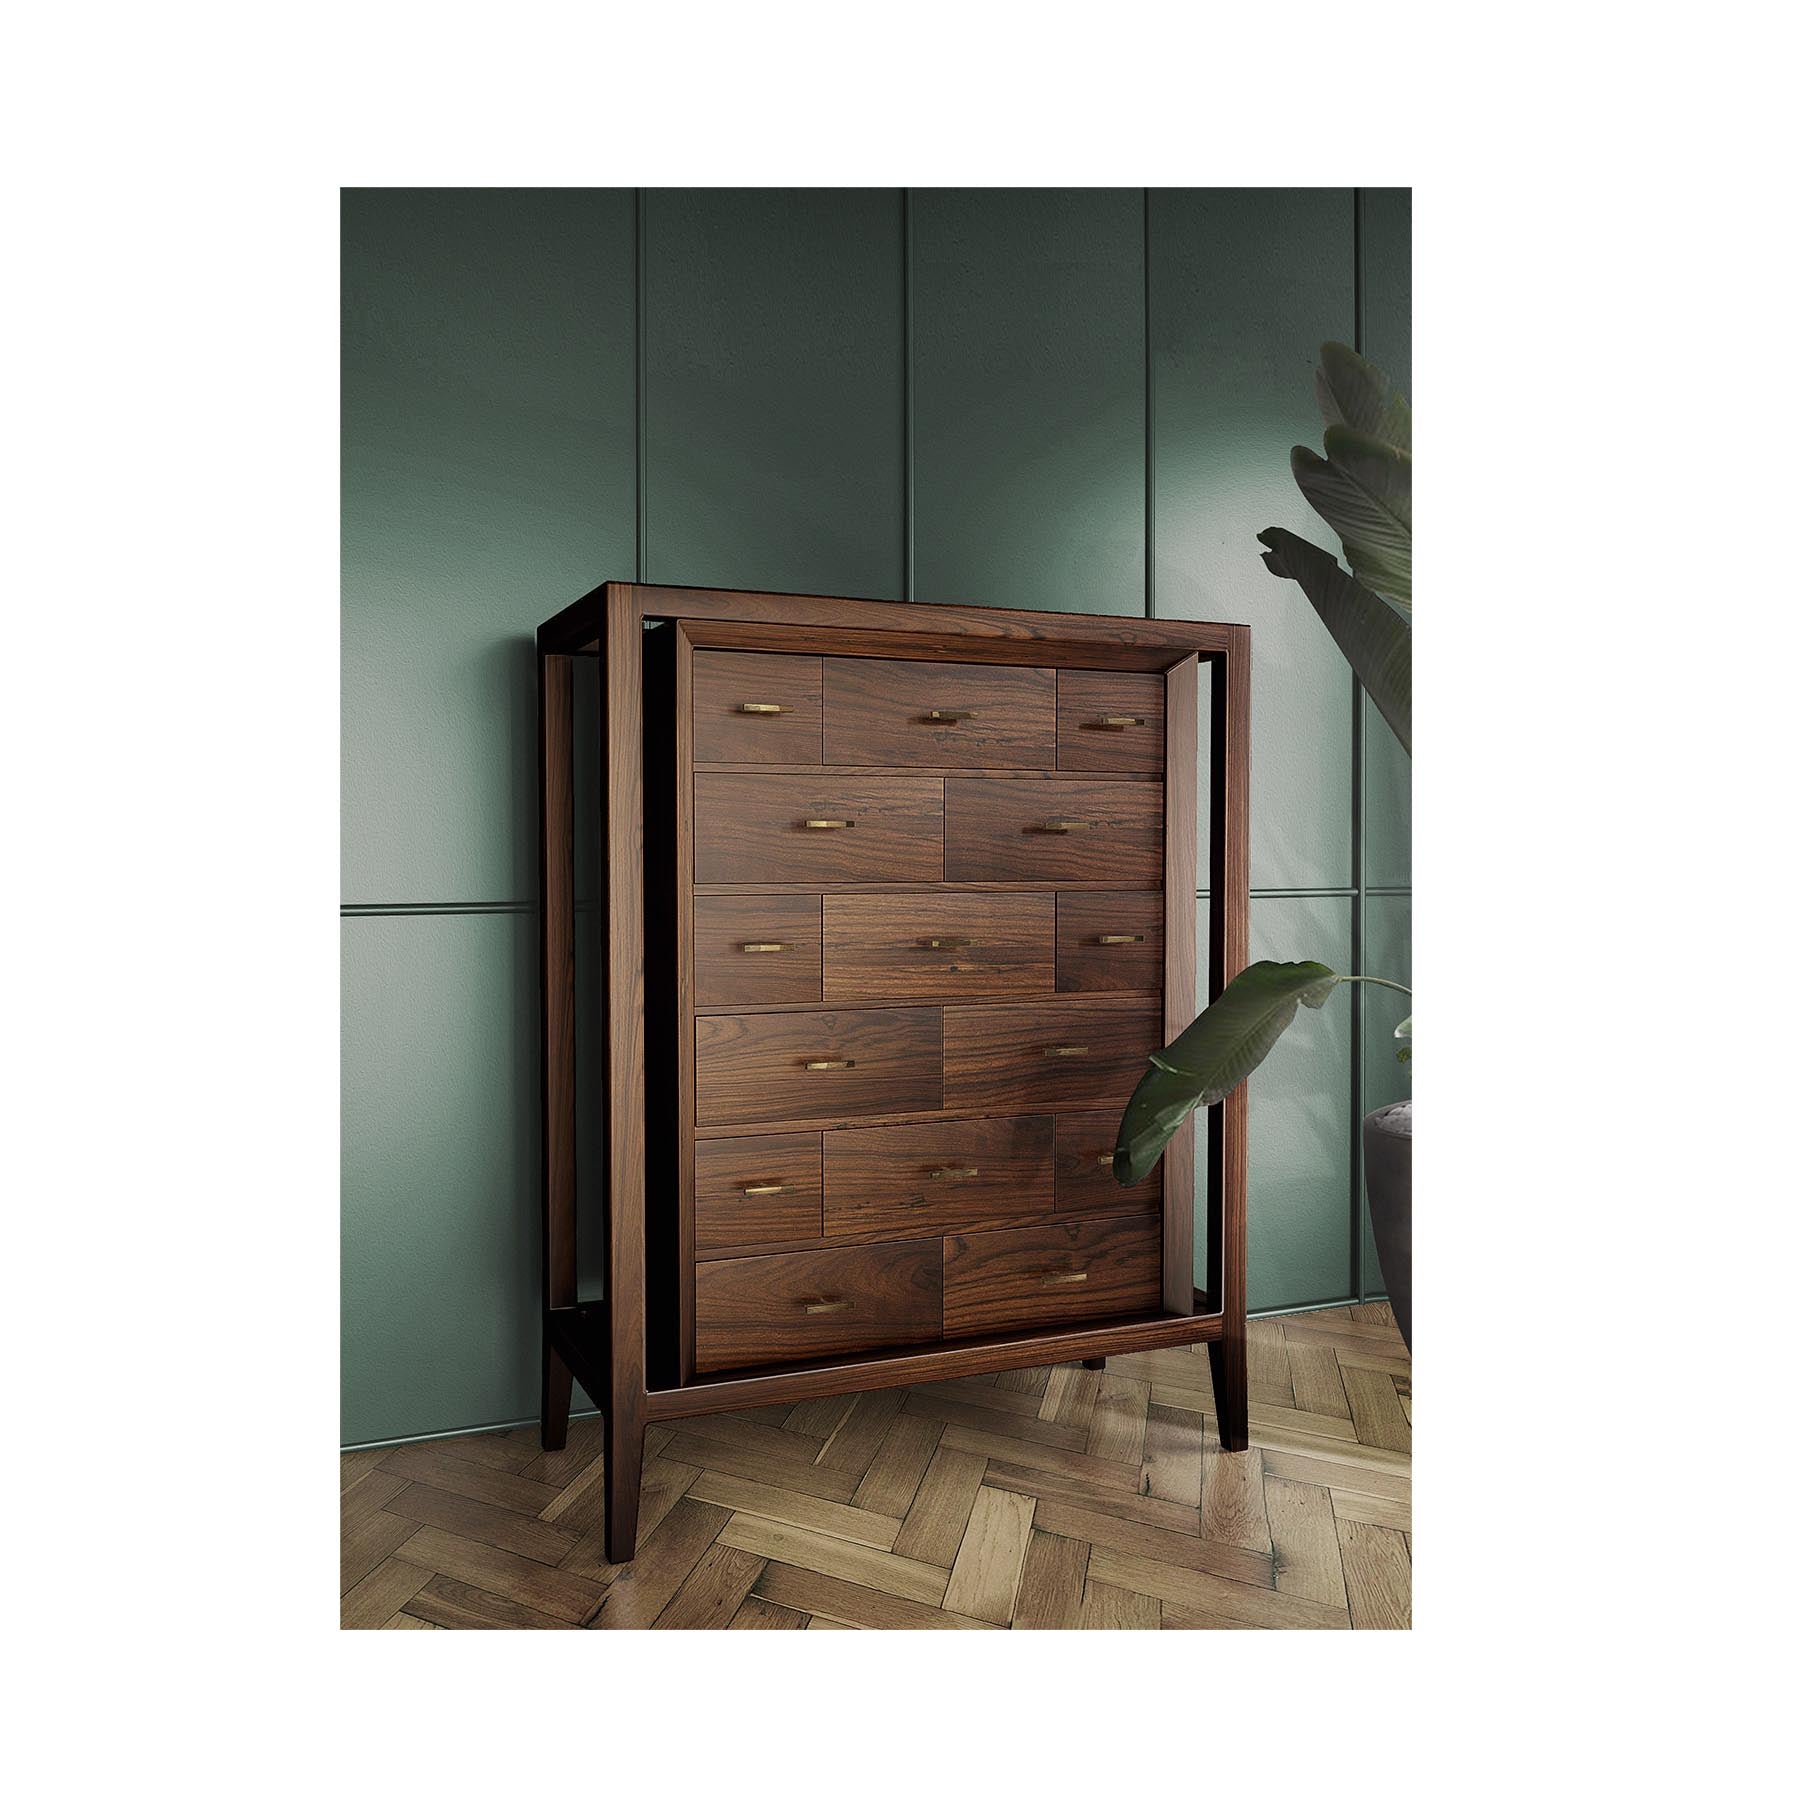 CAXTON - CHEST OF DRAWERS | Modern Furniture + Decor